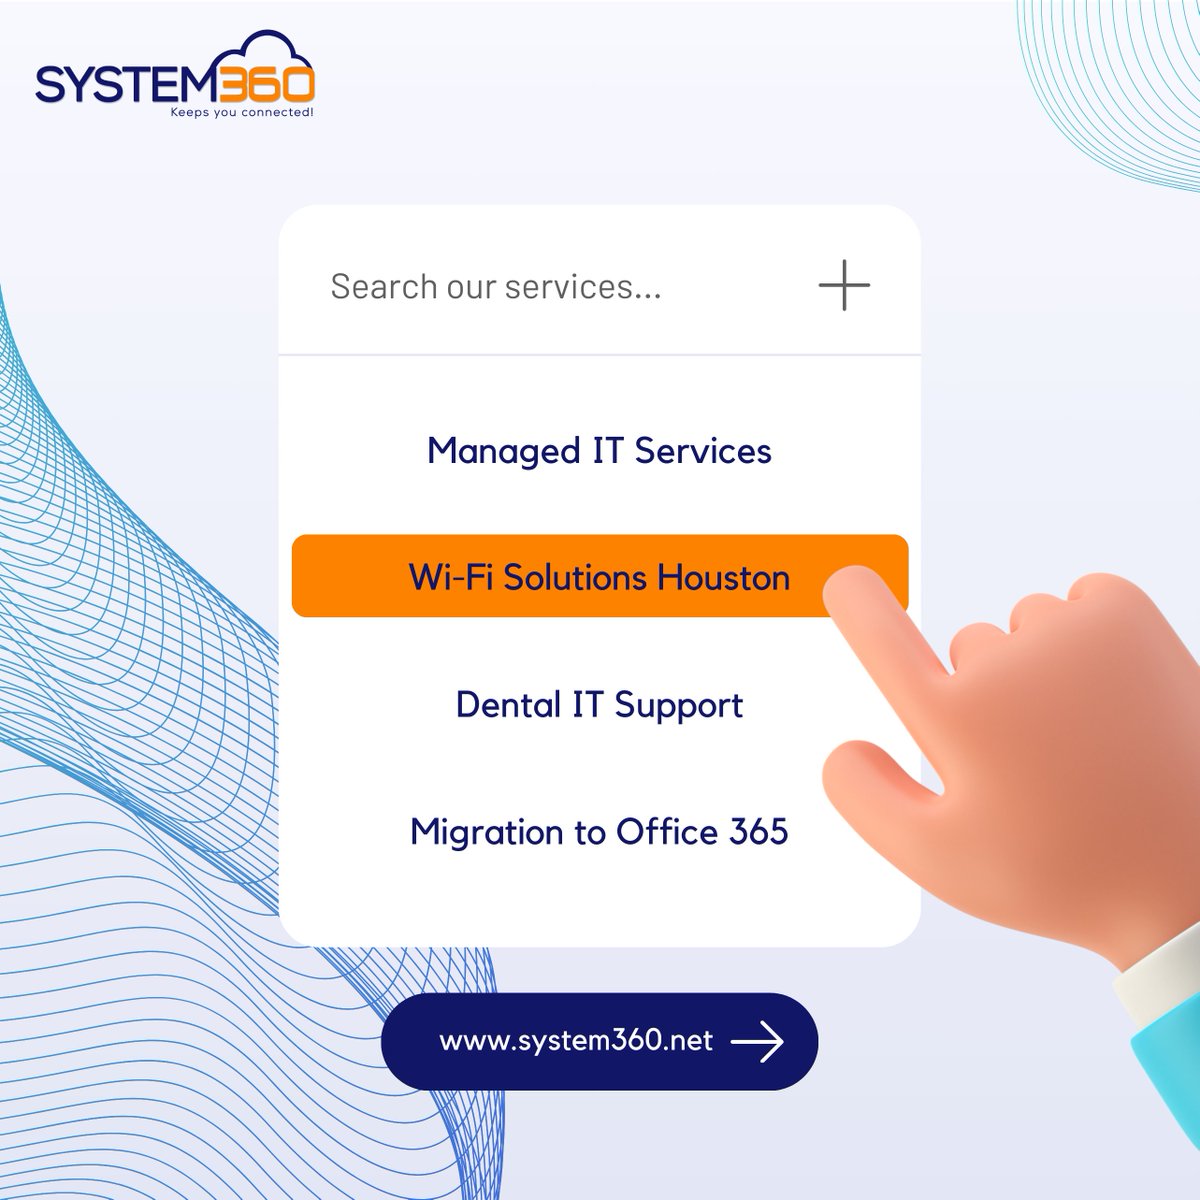 🔍 Explore Our IT Services at System360!

🌐 system360.net

#System360 #ITServices #HoustonWi-Fi #DentalITSupport #Office365Migration #ITSupport #ManagedServices #HoustonBusiness #NetworkSolutions #TailoredIT #TechExperts #BusinessEfficiency #houstontx